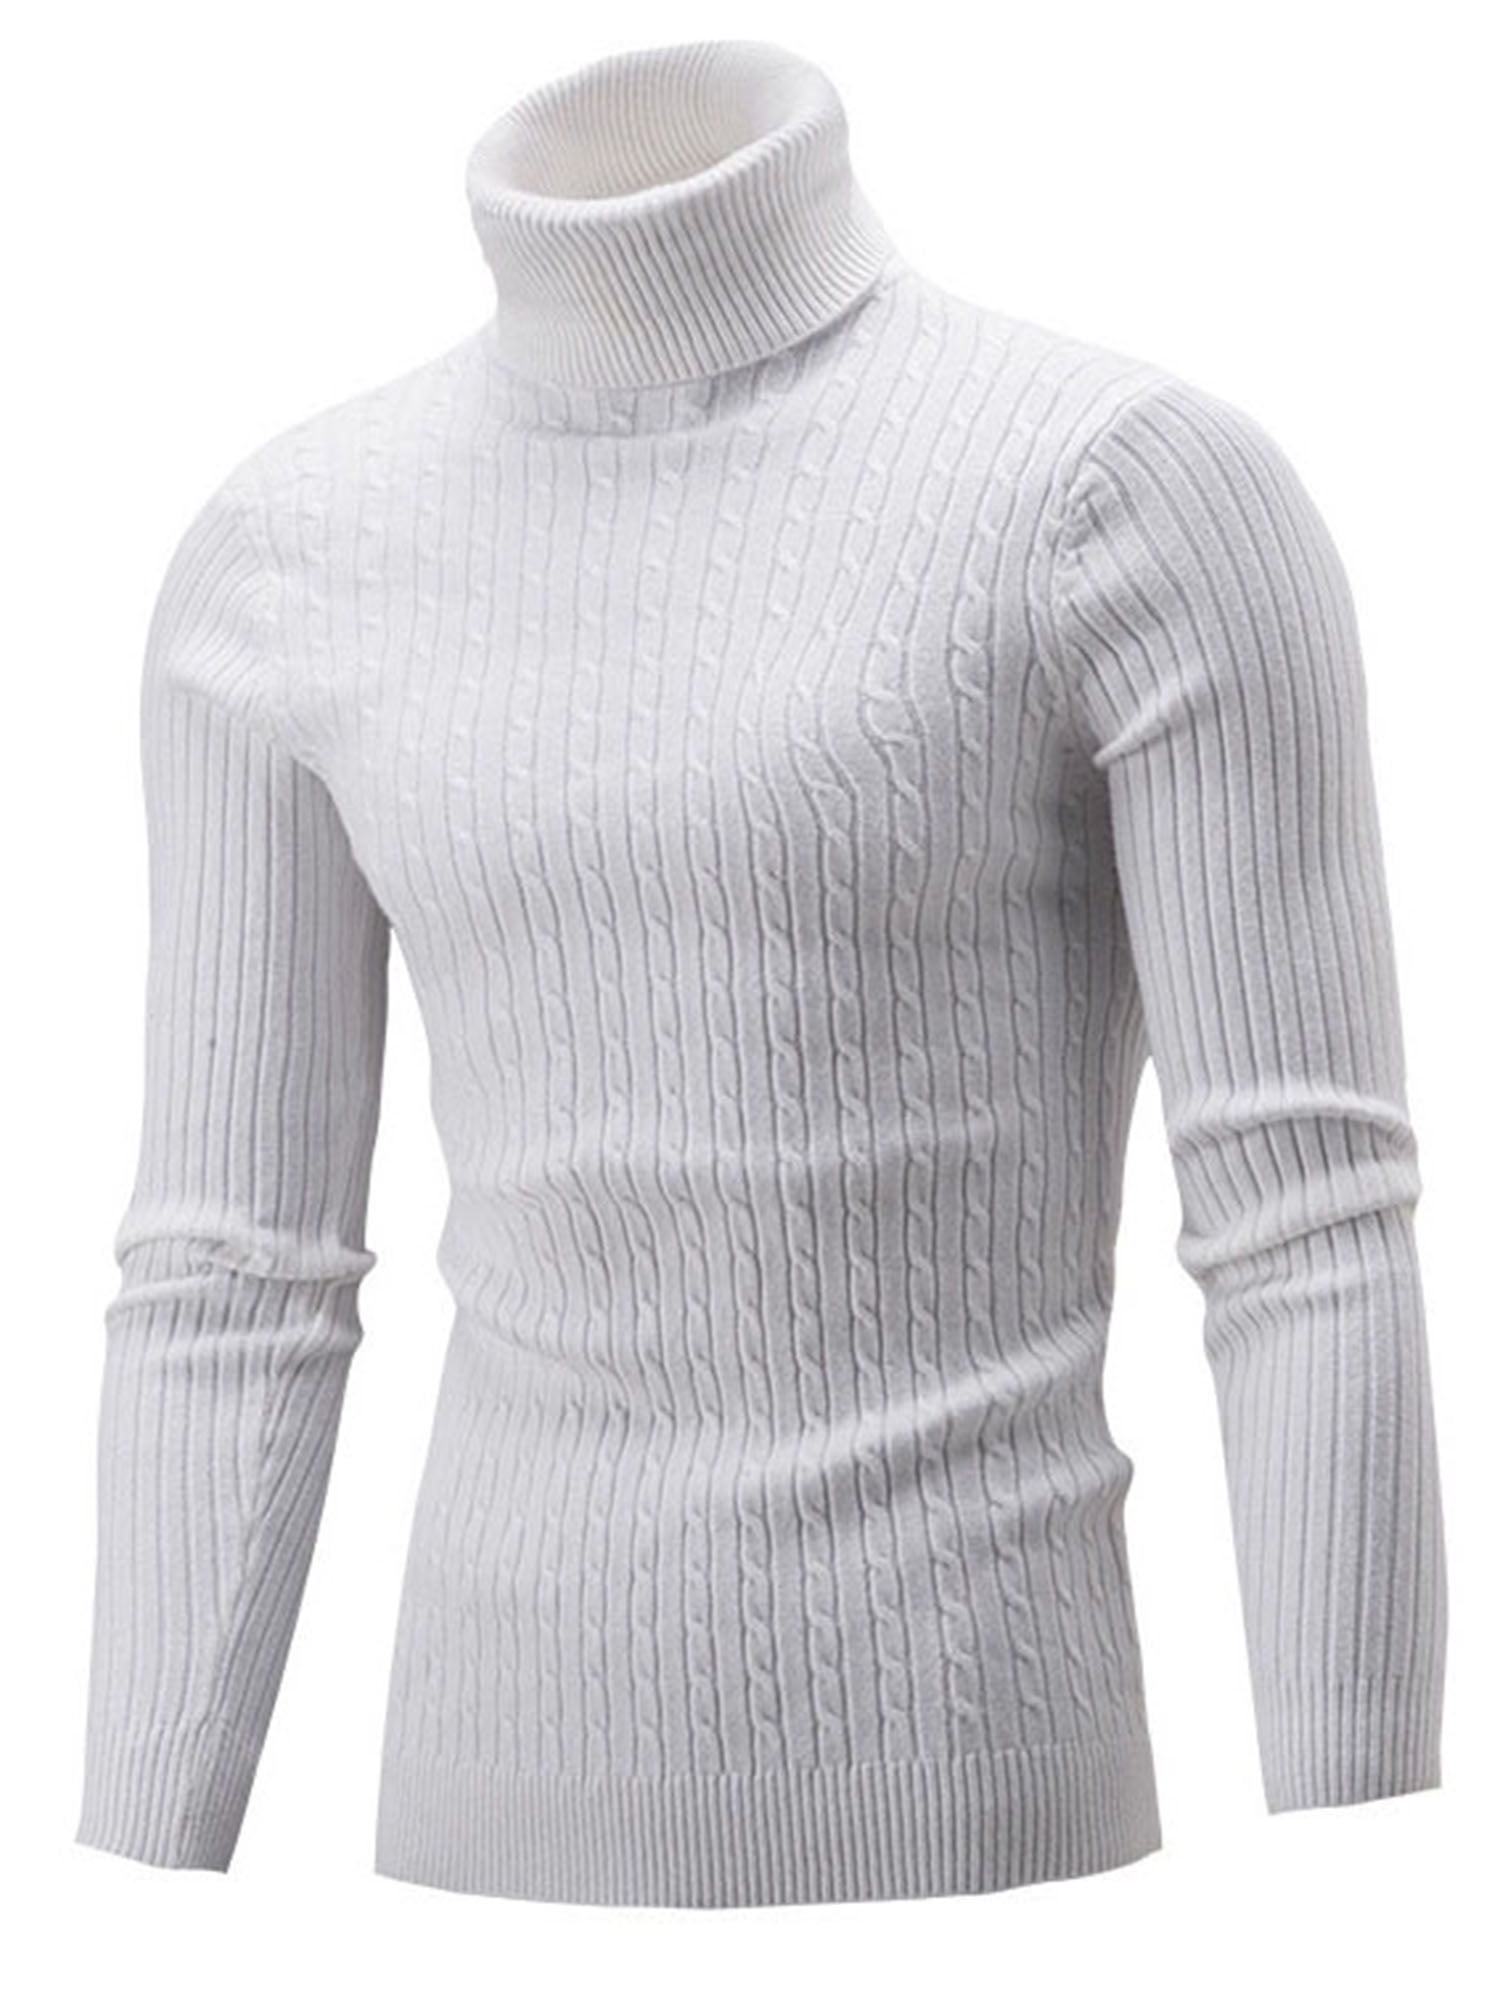 Generic Mens Autumn Turtleneck Knitting Slim Fit Solid Color Winter Cardigan Sweaters 